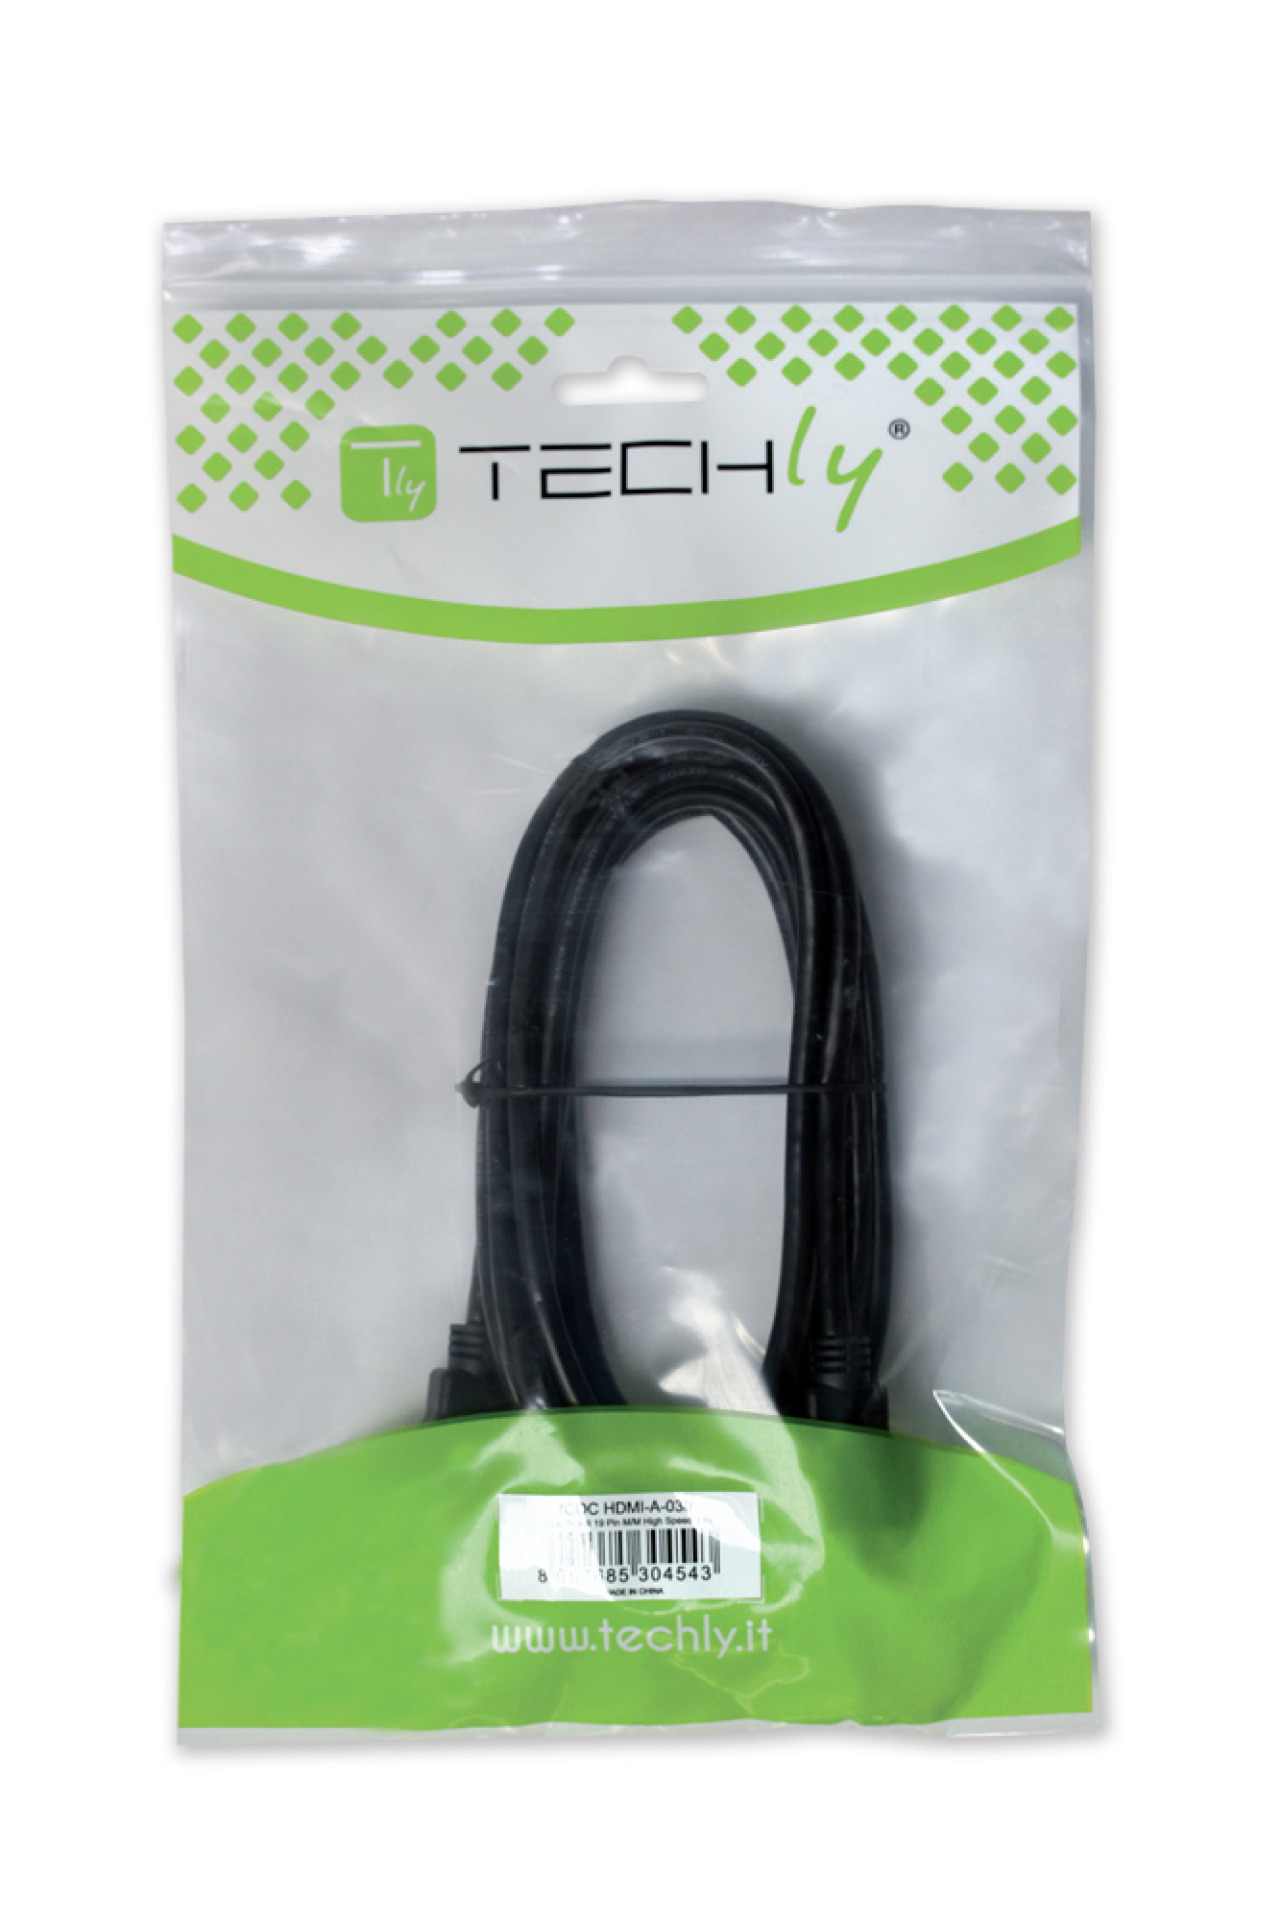 HDMI High Speed Flat Cable with Ethernet A/A M/M, 1 m